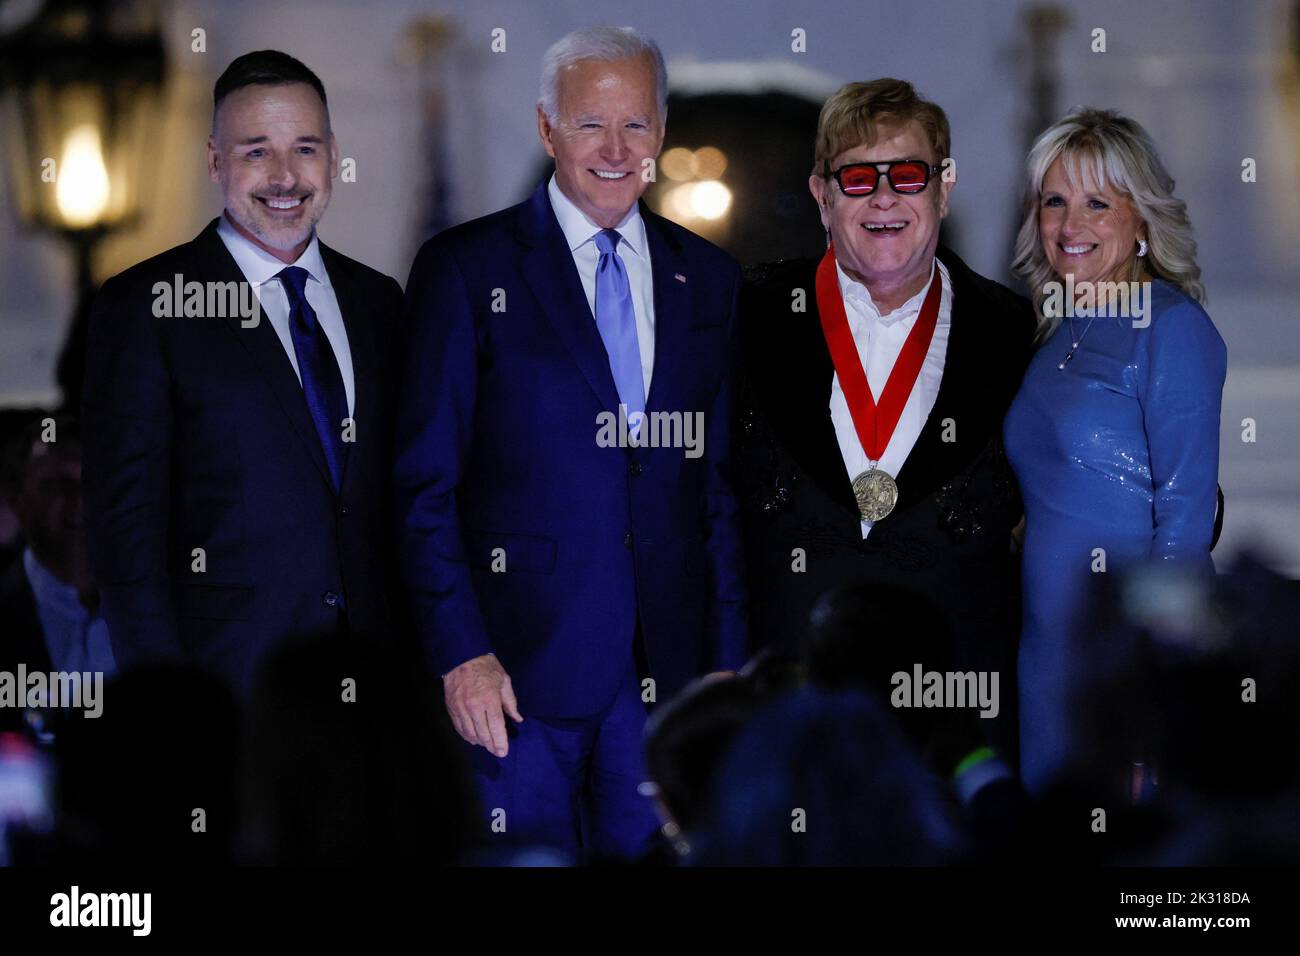 British rocker Elton John reacts after being awarded the National Humanities Medal by U.S. President Joe Biden and U.S. first lady Jill Biden at the White House in Washington, U.S., September 23, 2022. REUTERS/Evelyn Hockstein Stock Photo